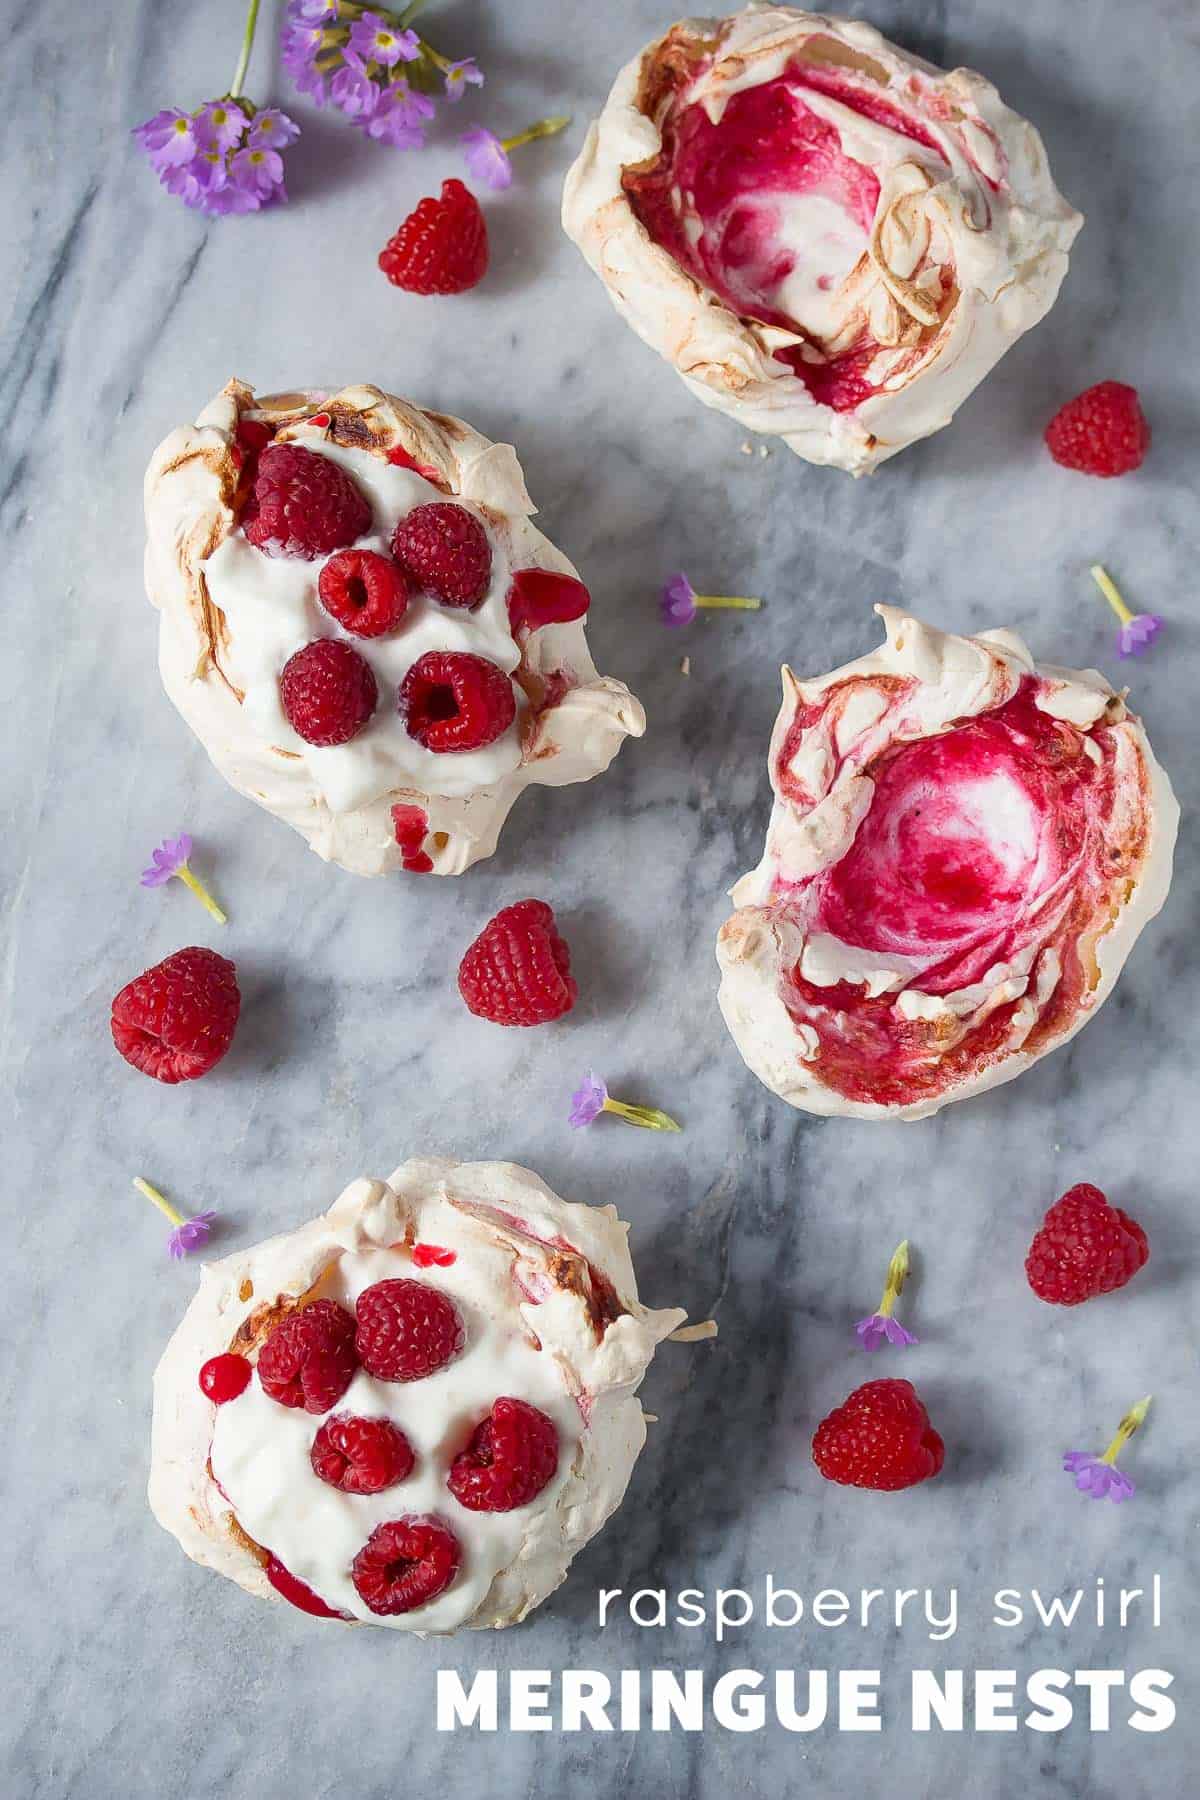 overhead view of 4 raspberry swirled meringue nests; 2 filled with whipped cream and berries